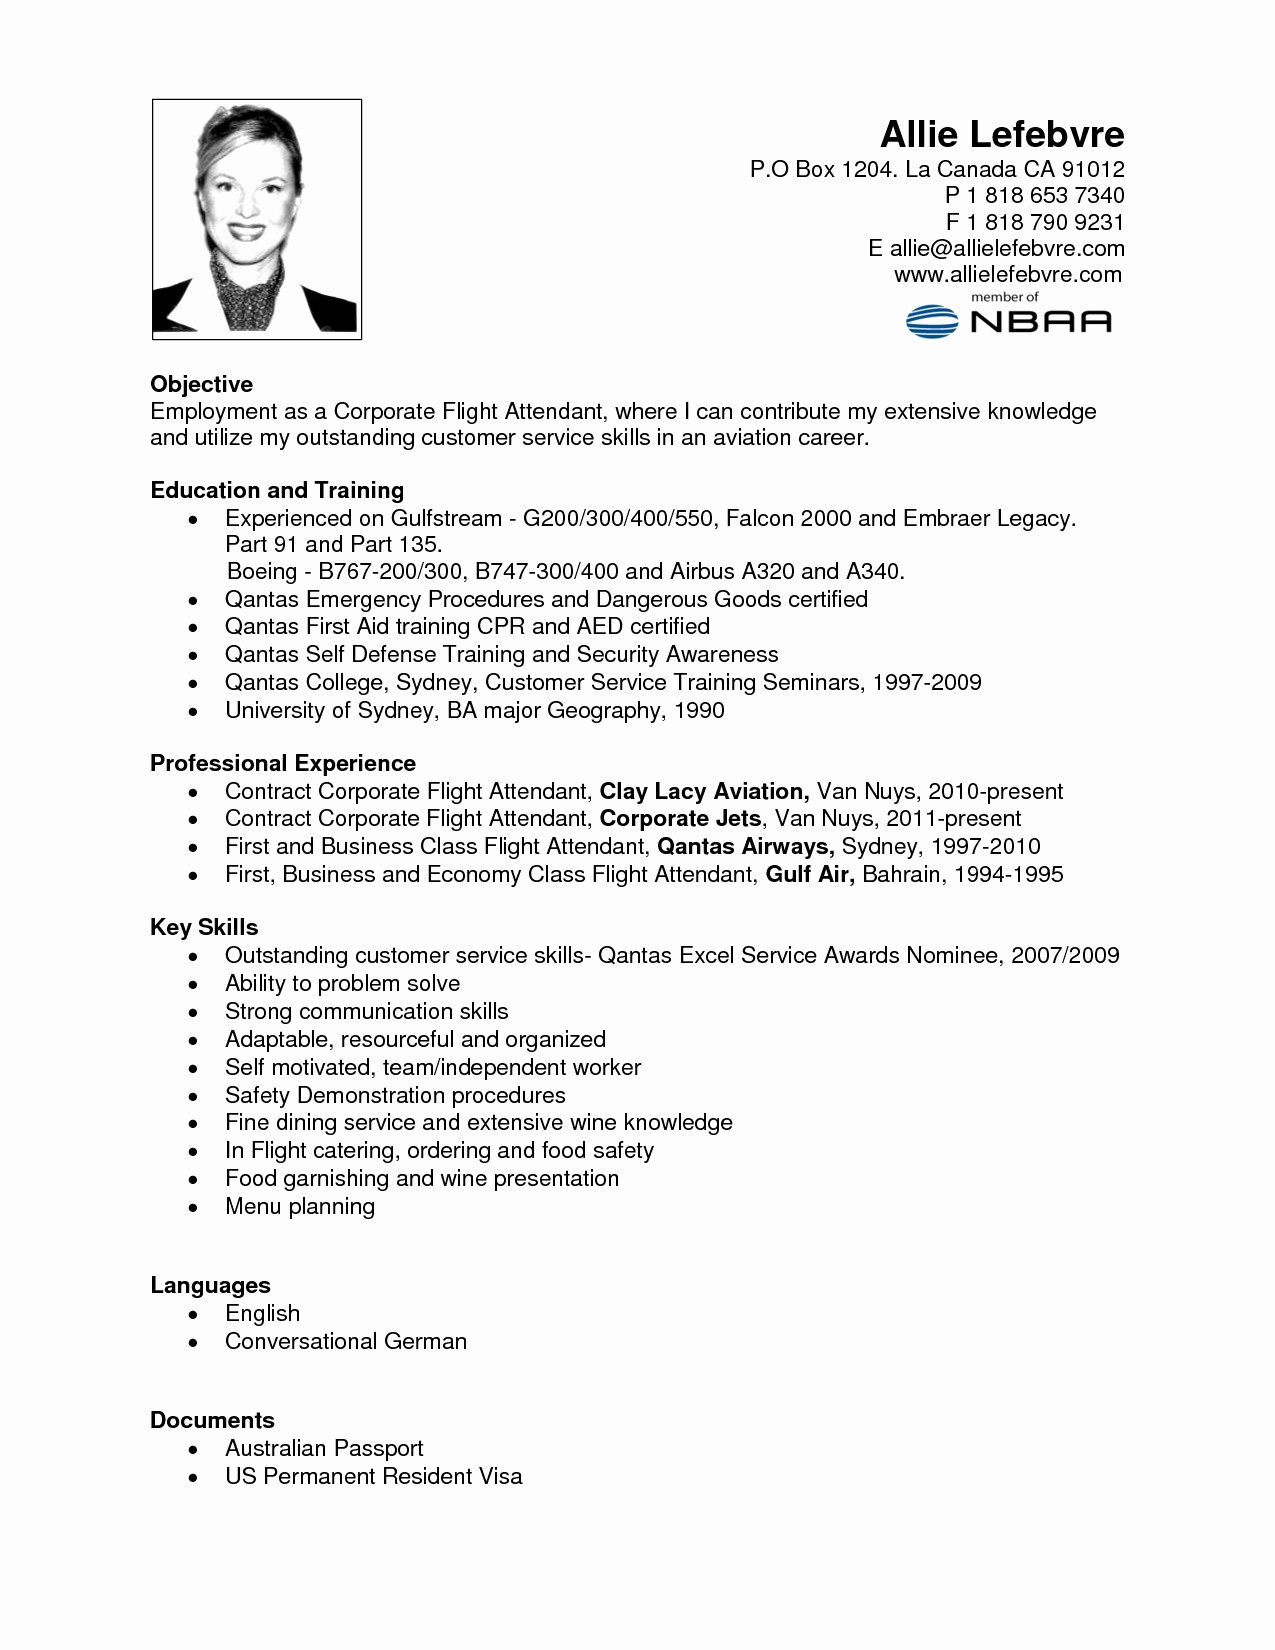 Sample Resume for Flight attendant with Experience Flight attendant Resume Sample